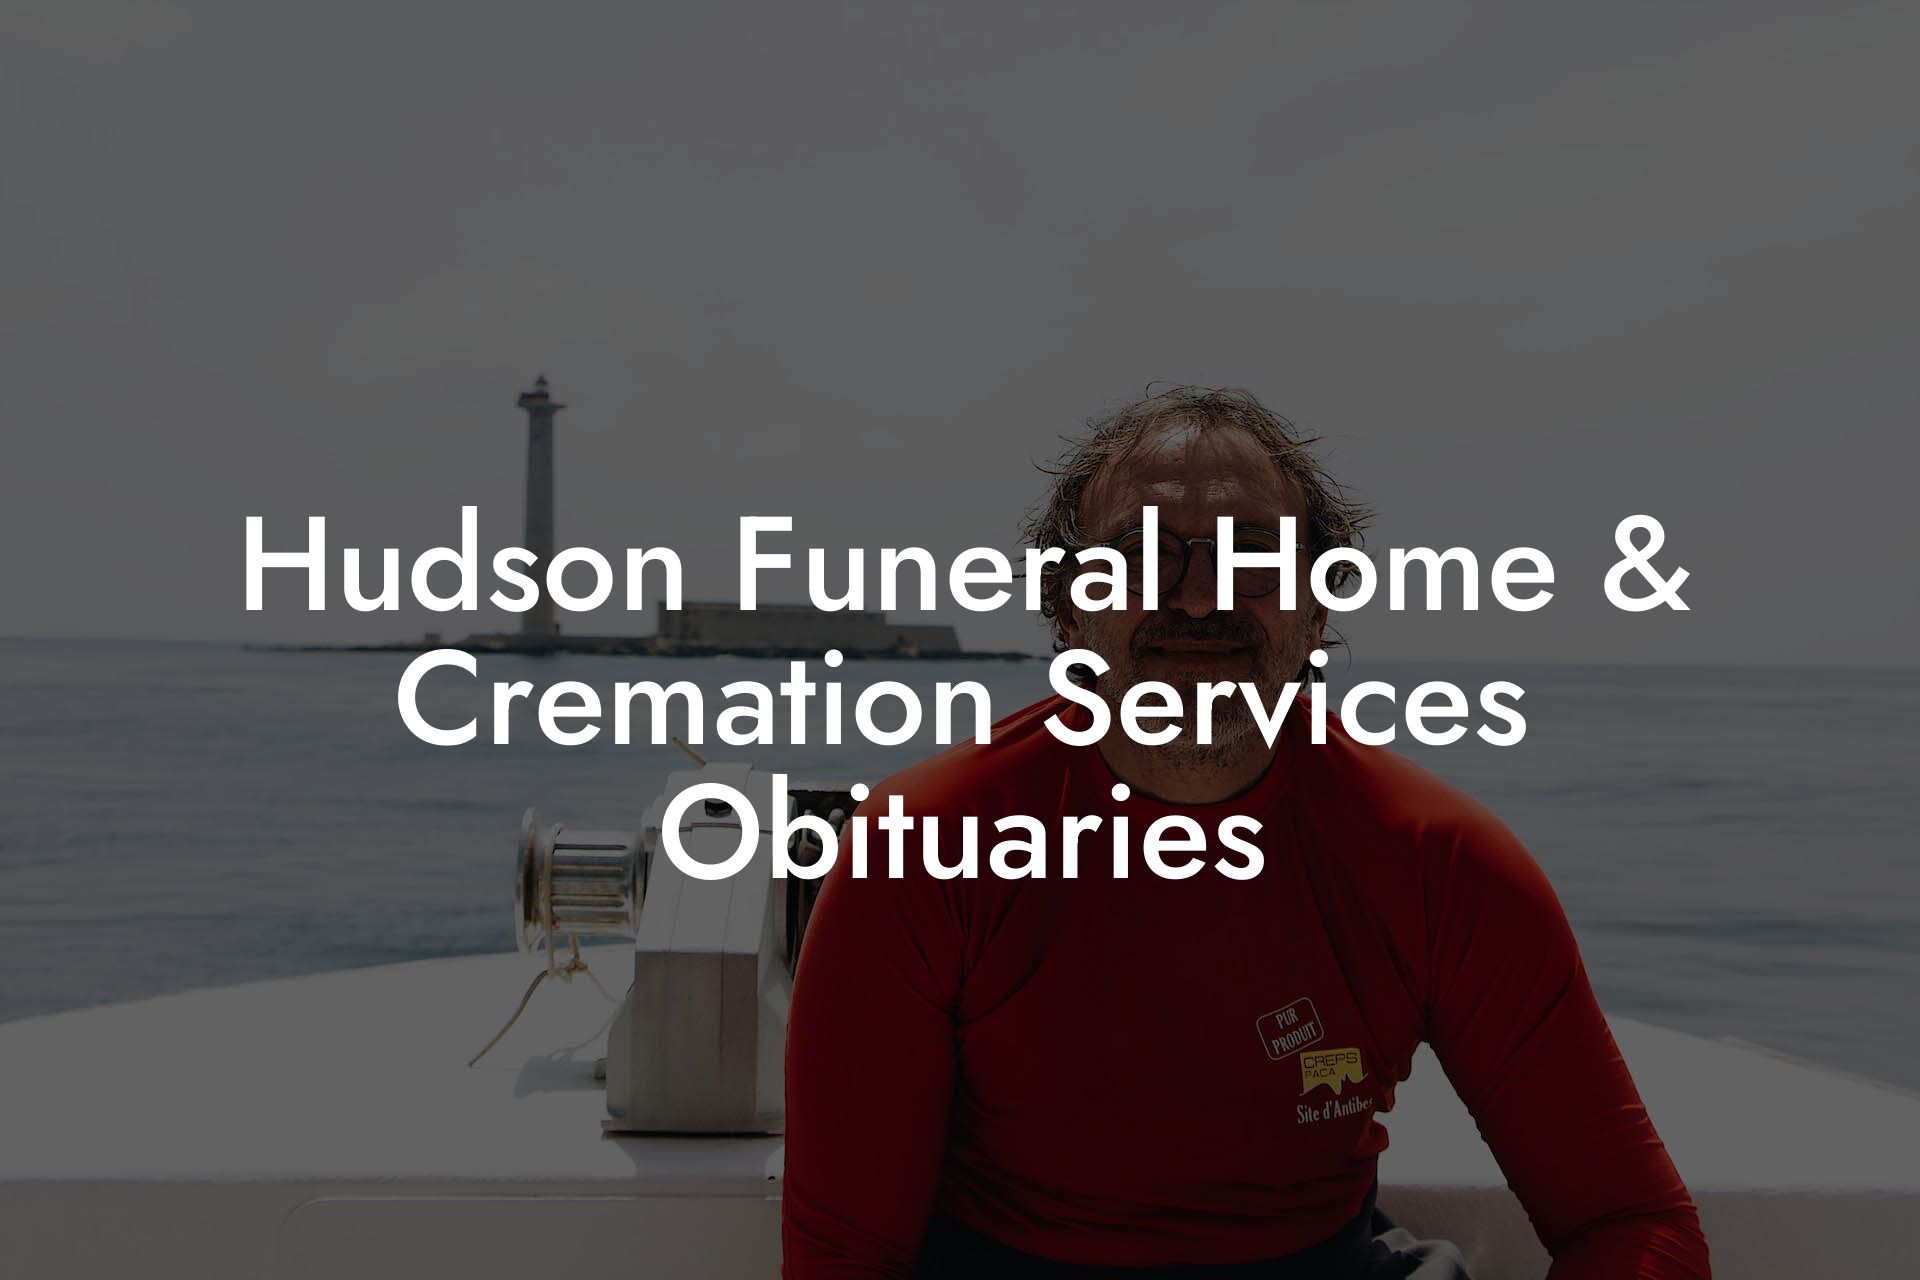 Hudson Funeral Home & Cremation Services Obituaries